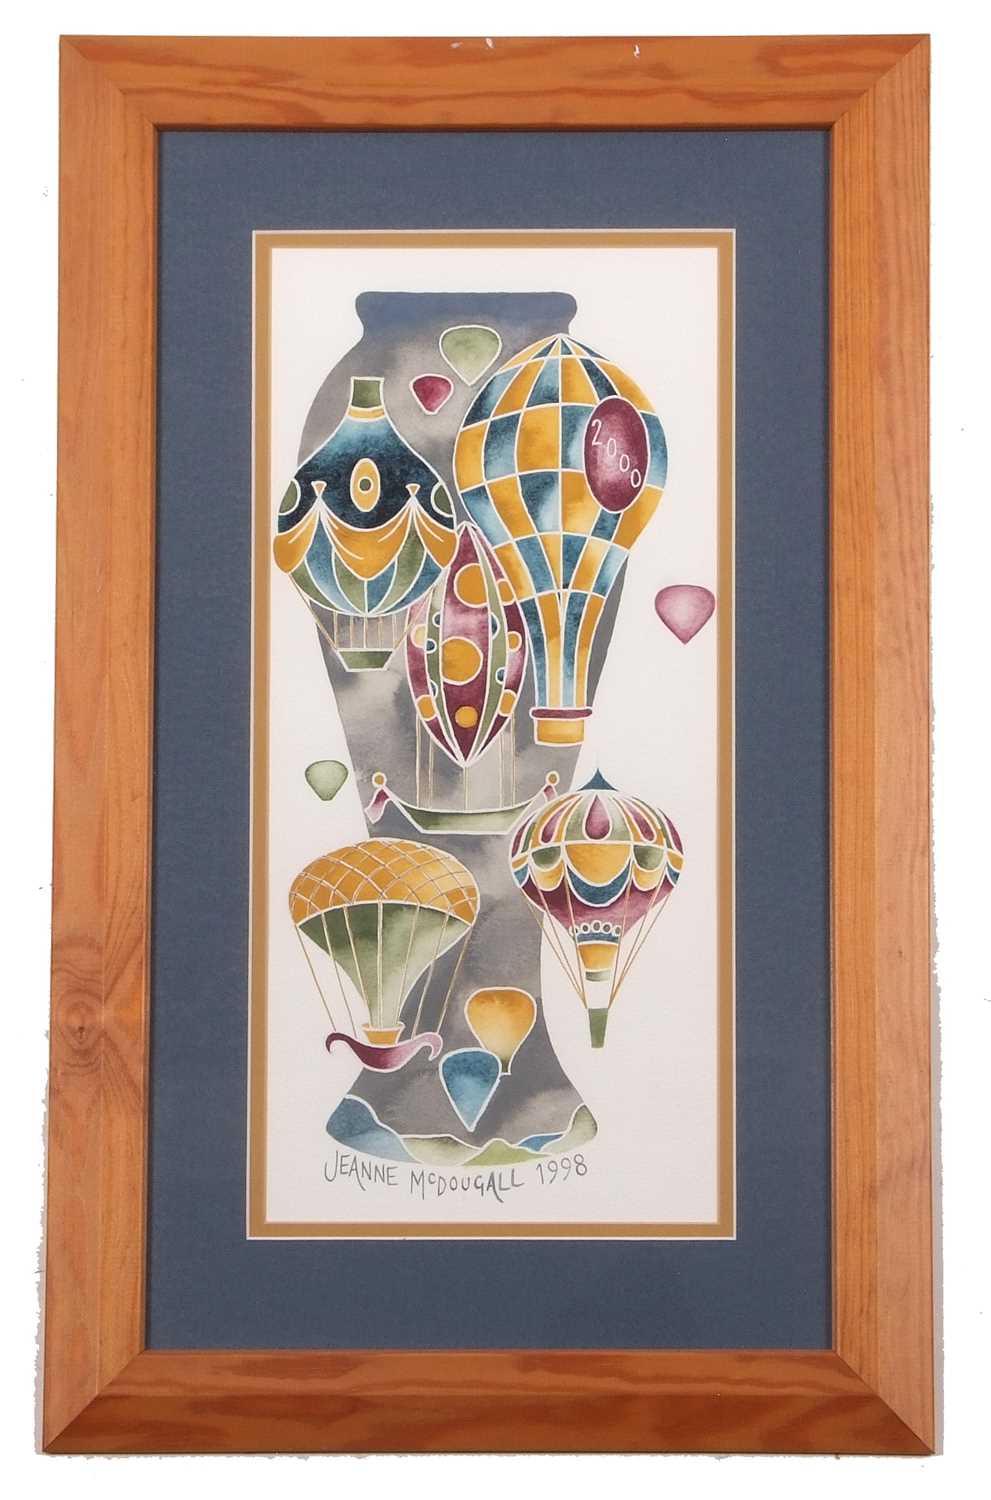 Moorcroft style ballooning watercolour signed by Moorcroft artist Jeanne McDougall - Image 2 of 3